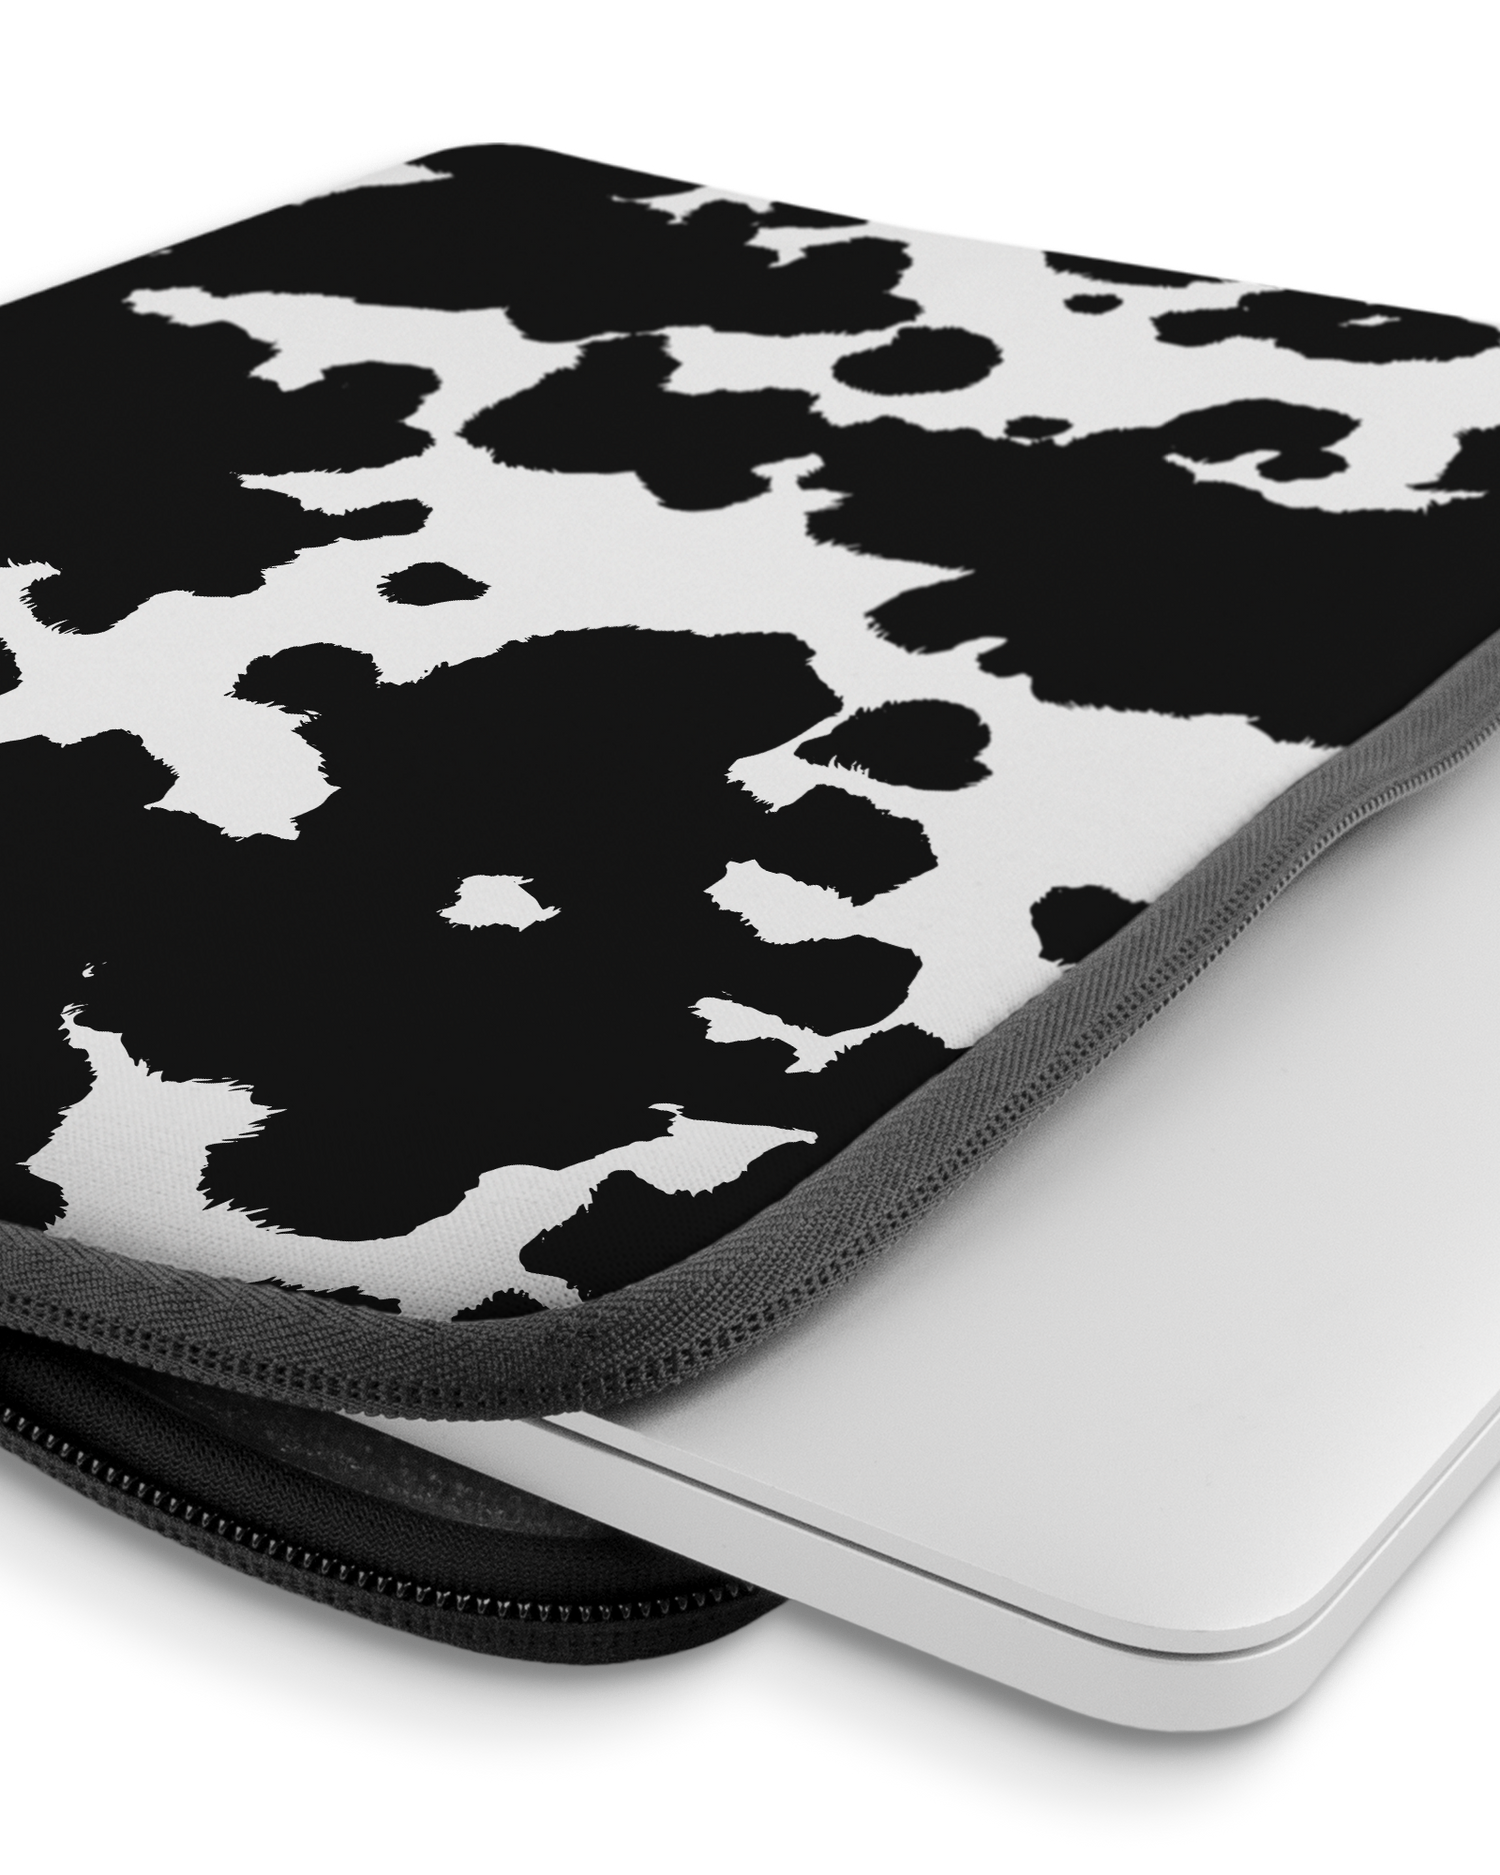 Cow Print Laptop Case 14 inch with device inside